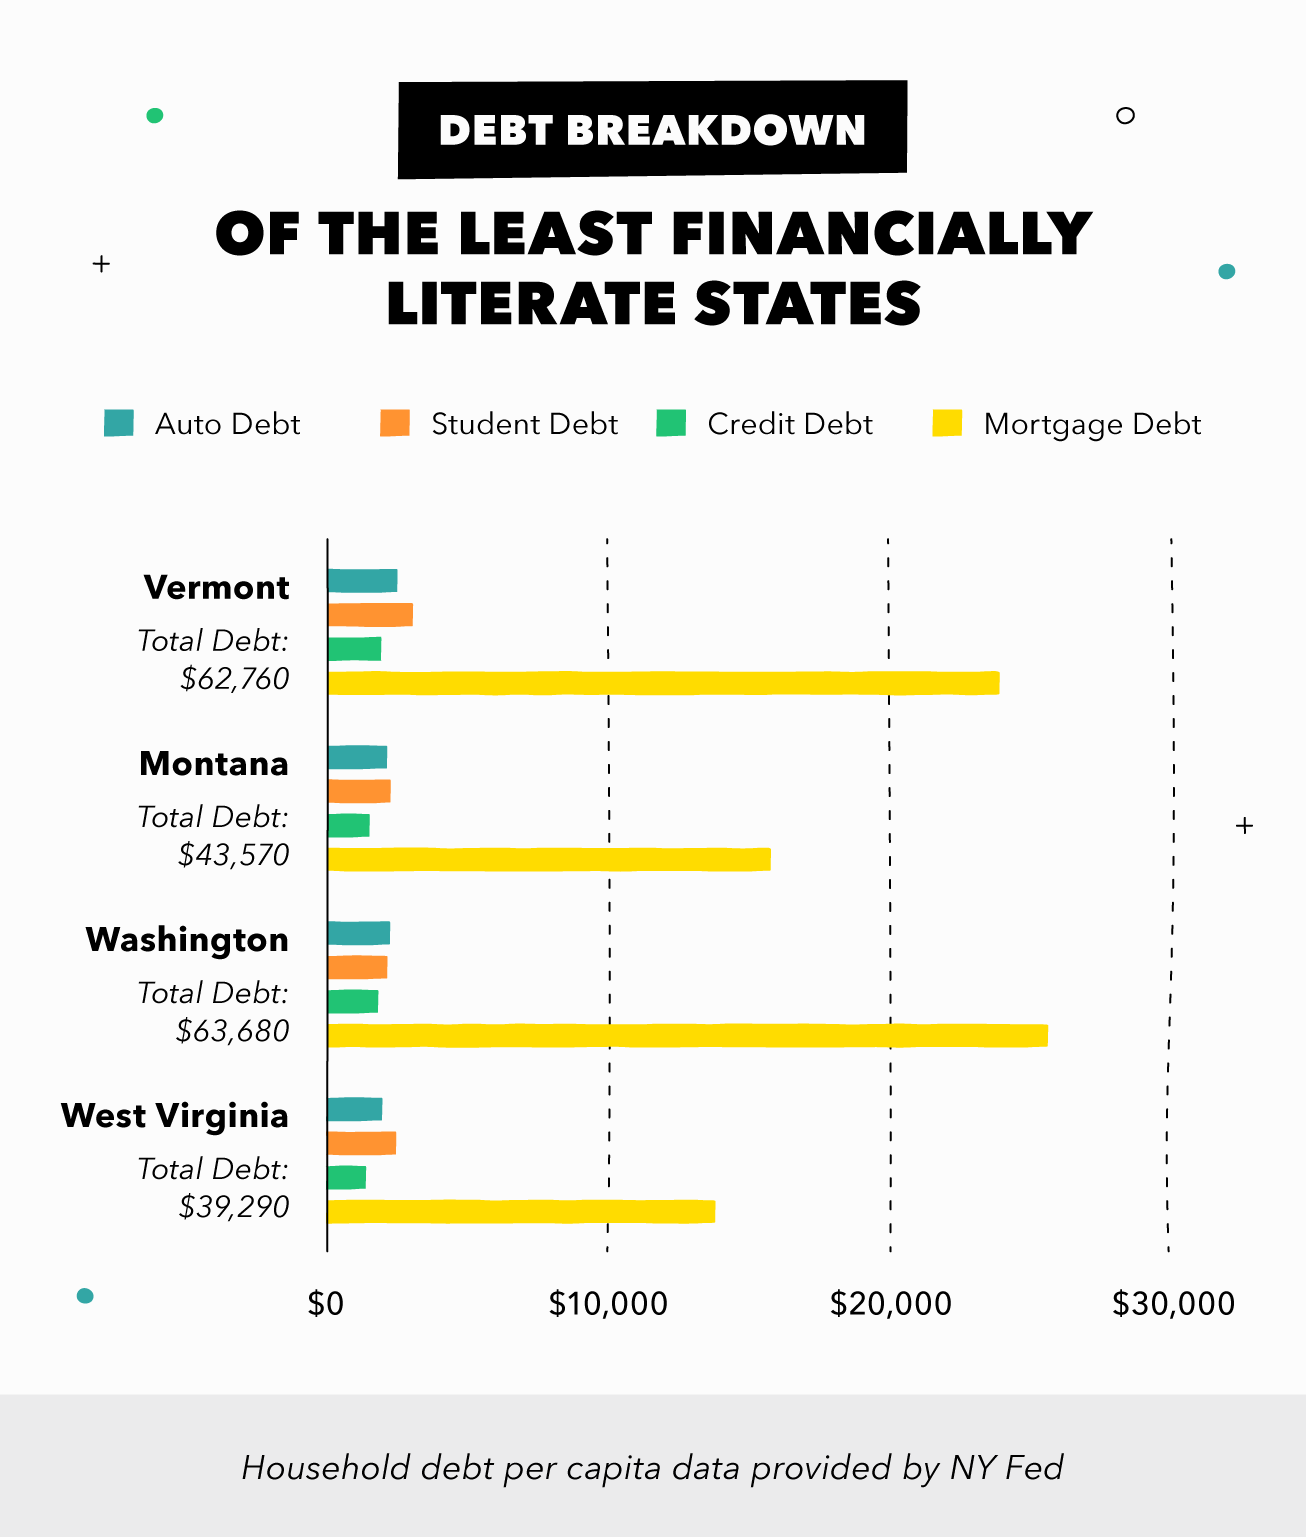 Average debt breakdown by individual in the least financially literate states